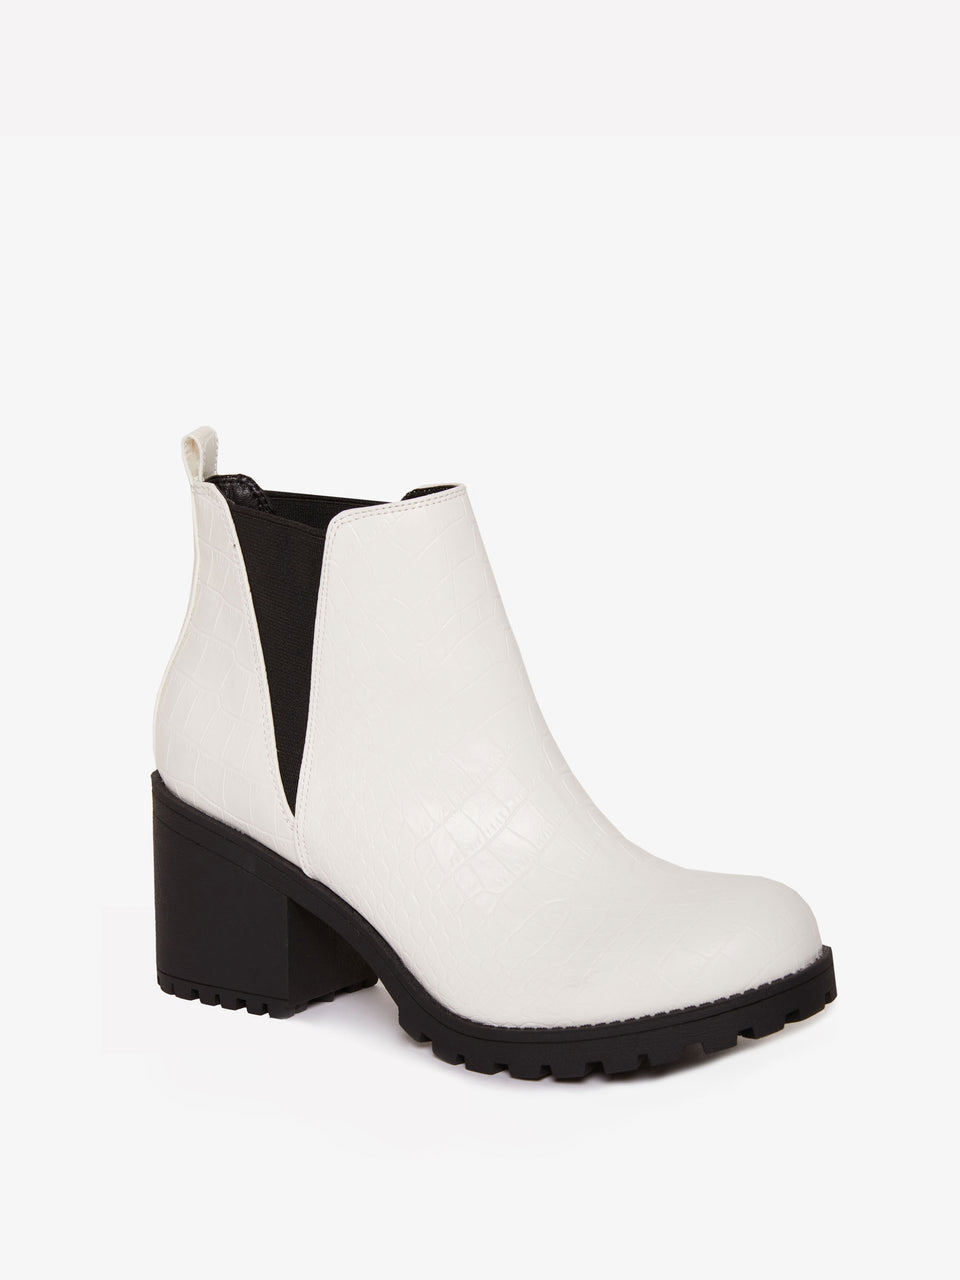 Chinese_Laundry_Lisbon_Croc_Bootie_White